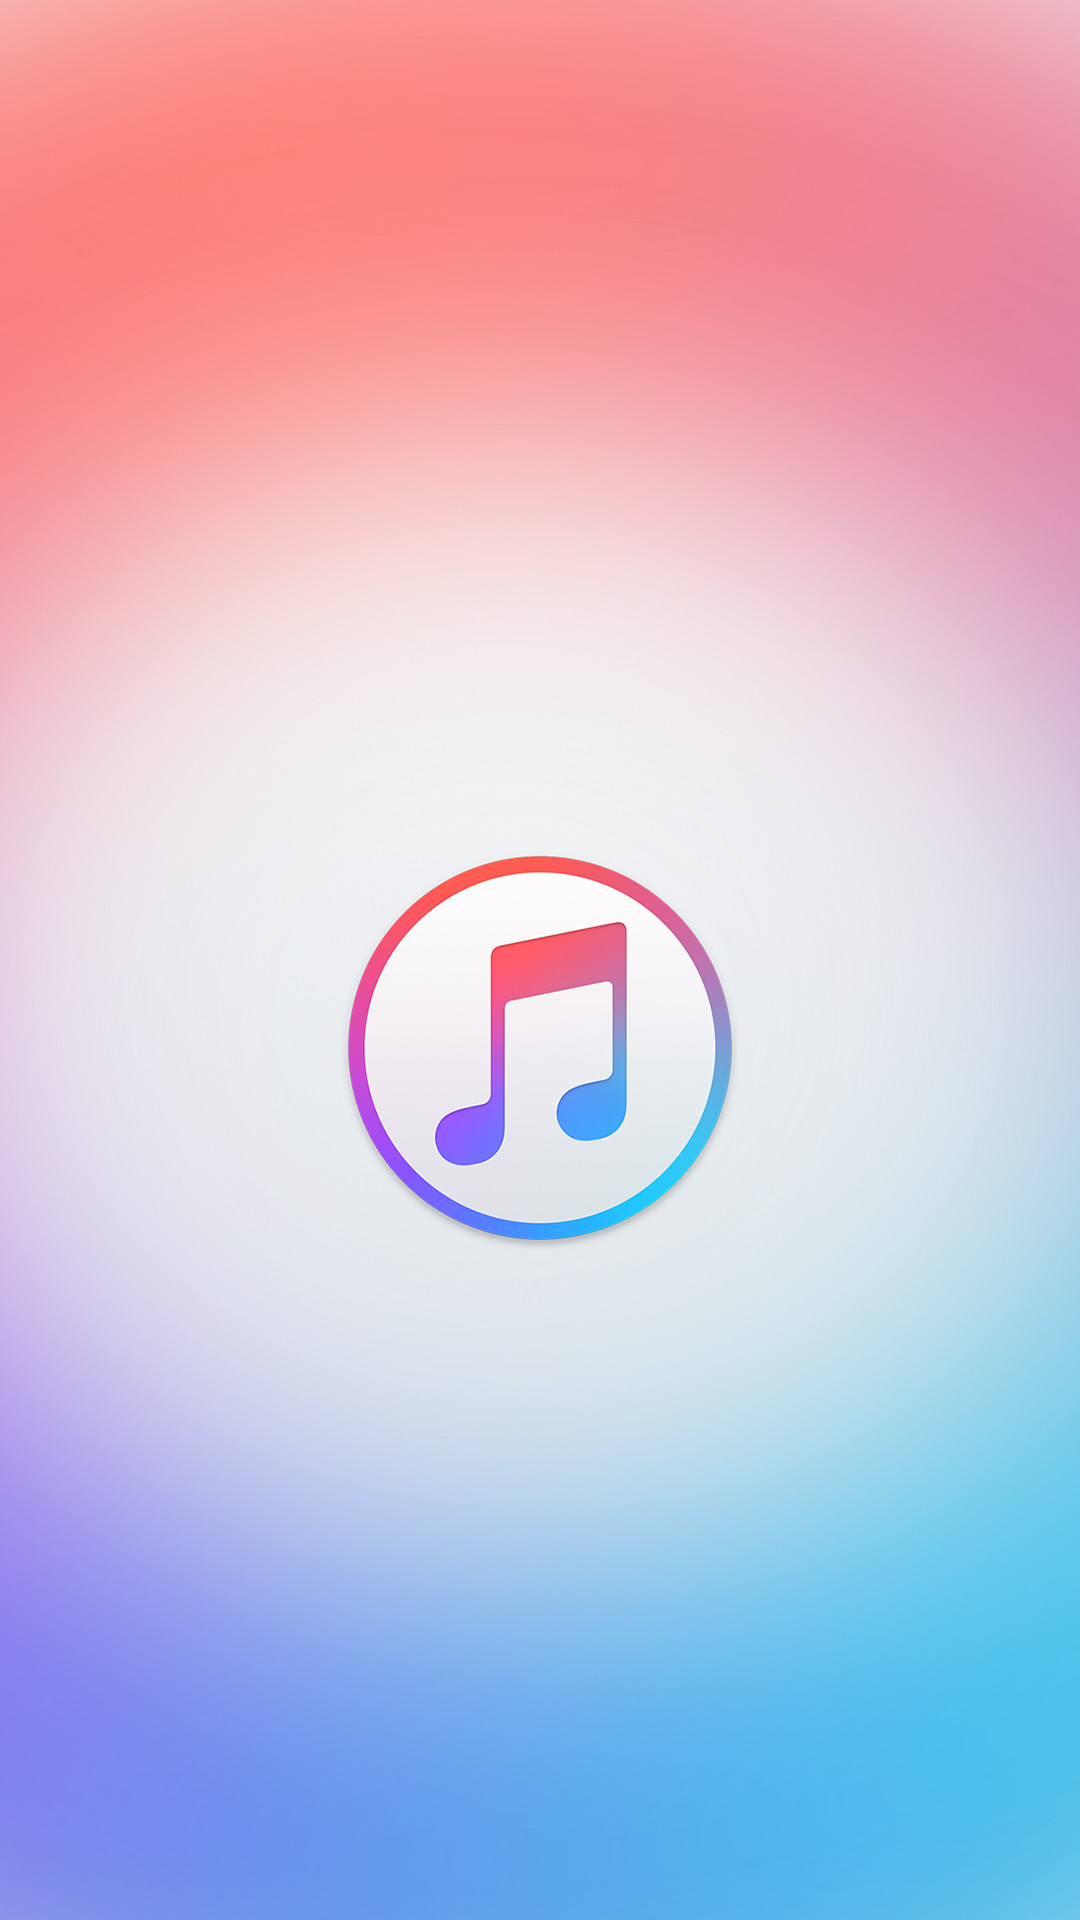 1080x1920 70 Music iPhone Wallpapers For Music Manias